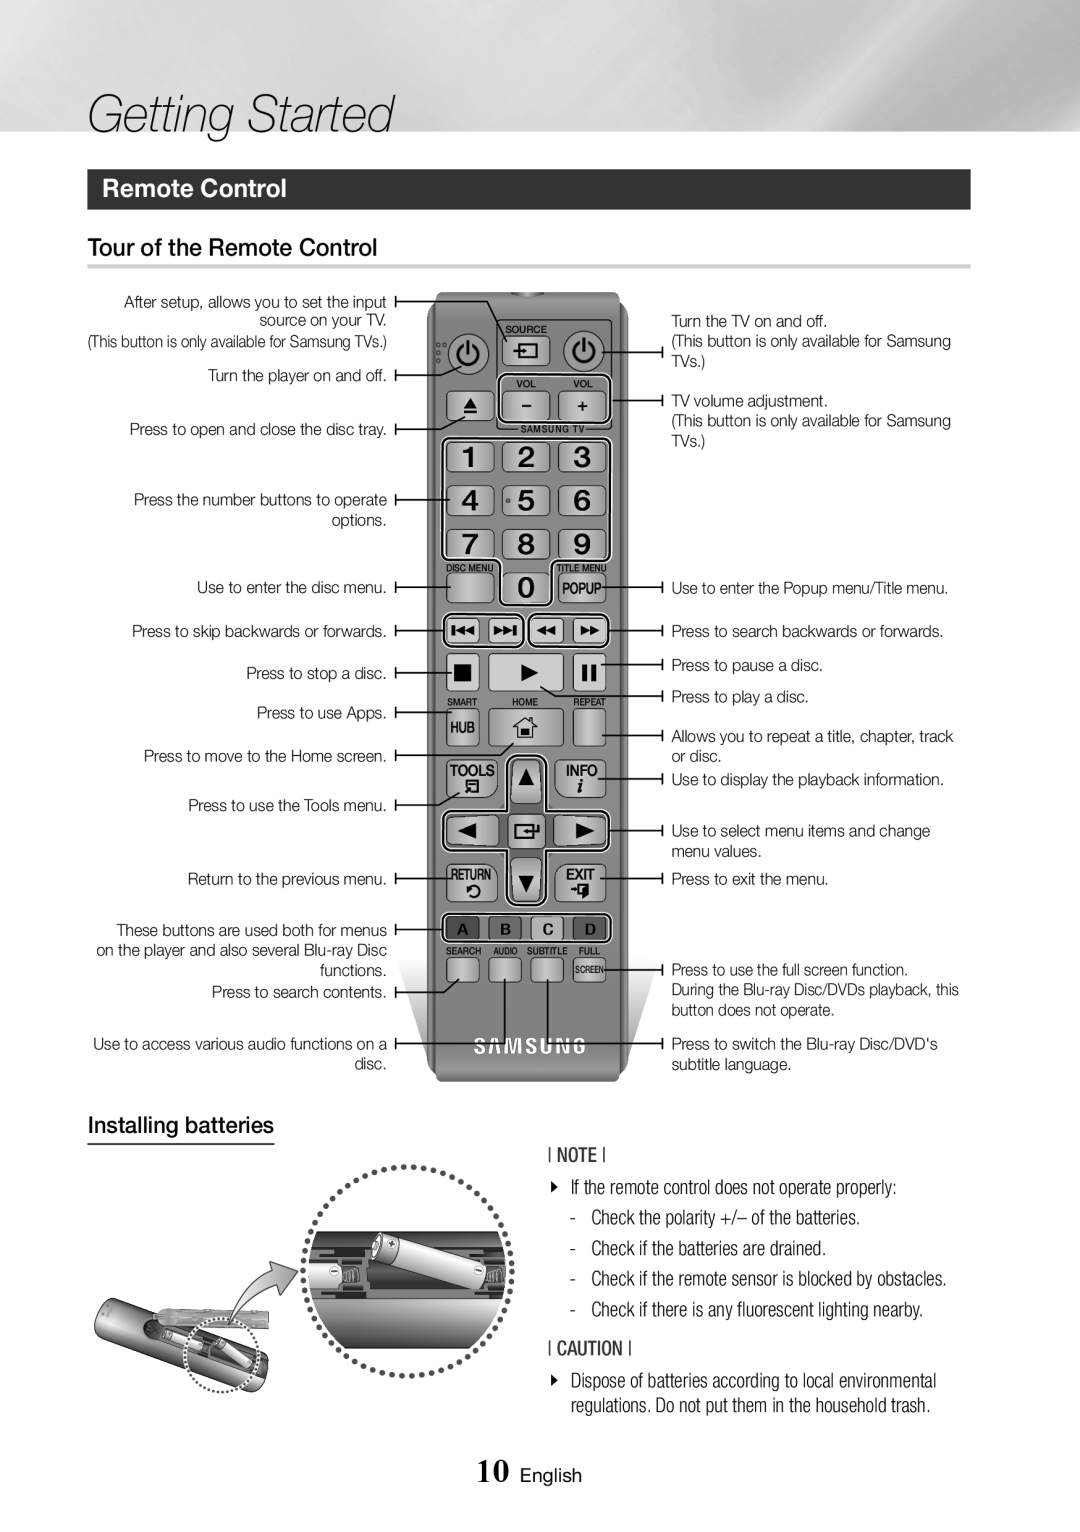 Samsung BD-J7500/EN manual Tour of the Remote Control, Installing batteries, Getting Started, Vol- + Vol+, English 